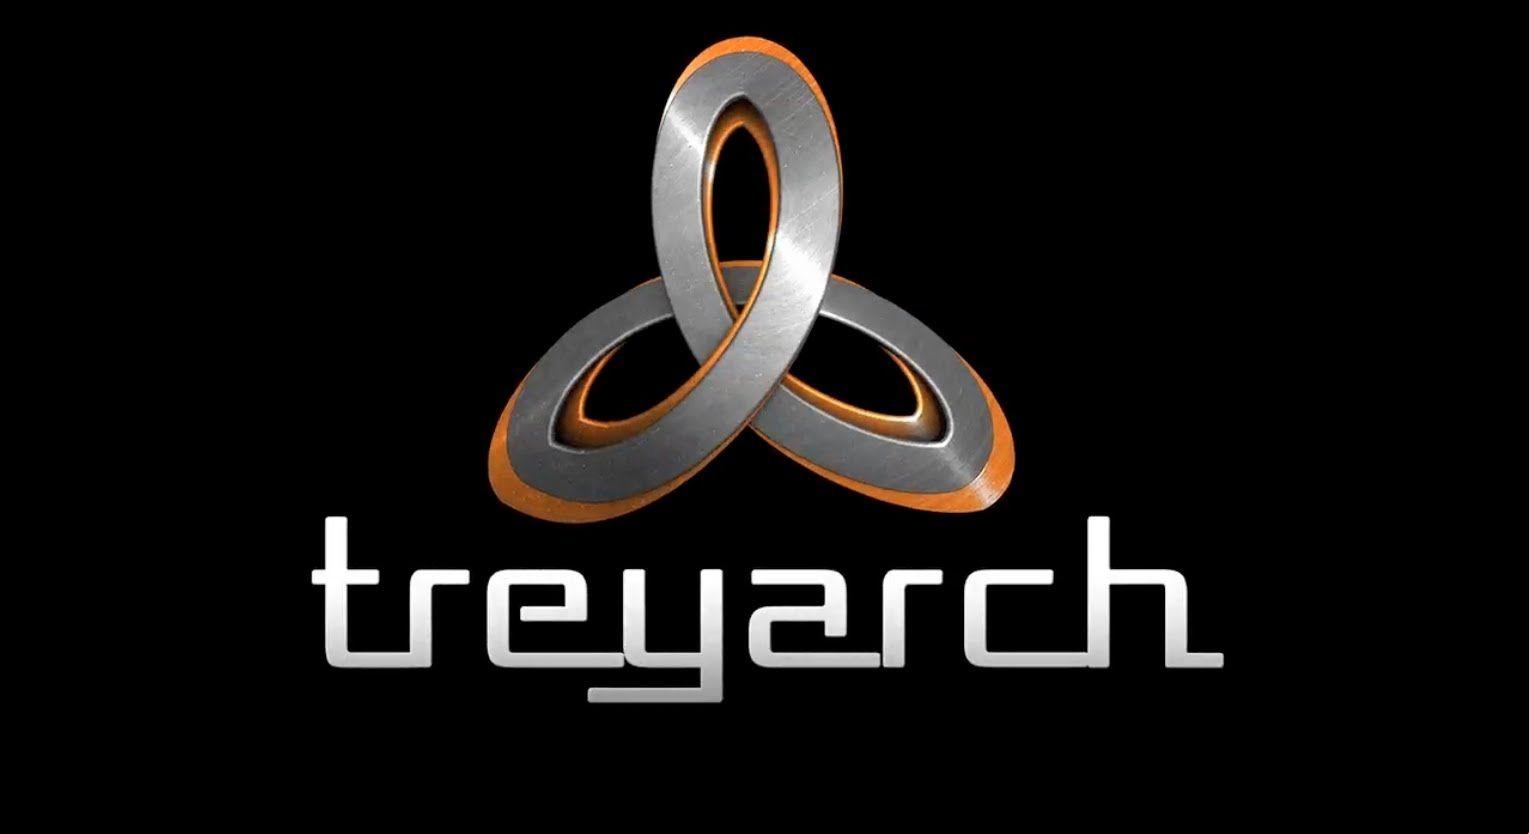 Treyarch Logo - Treyarch to Develop the Next Call of Duty Game - World at War 2 ...